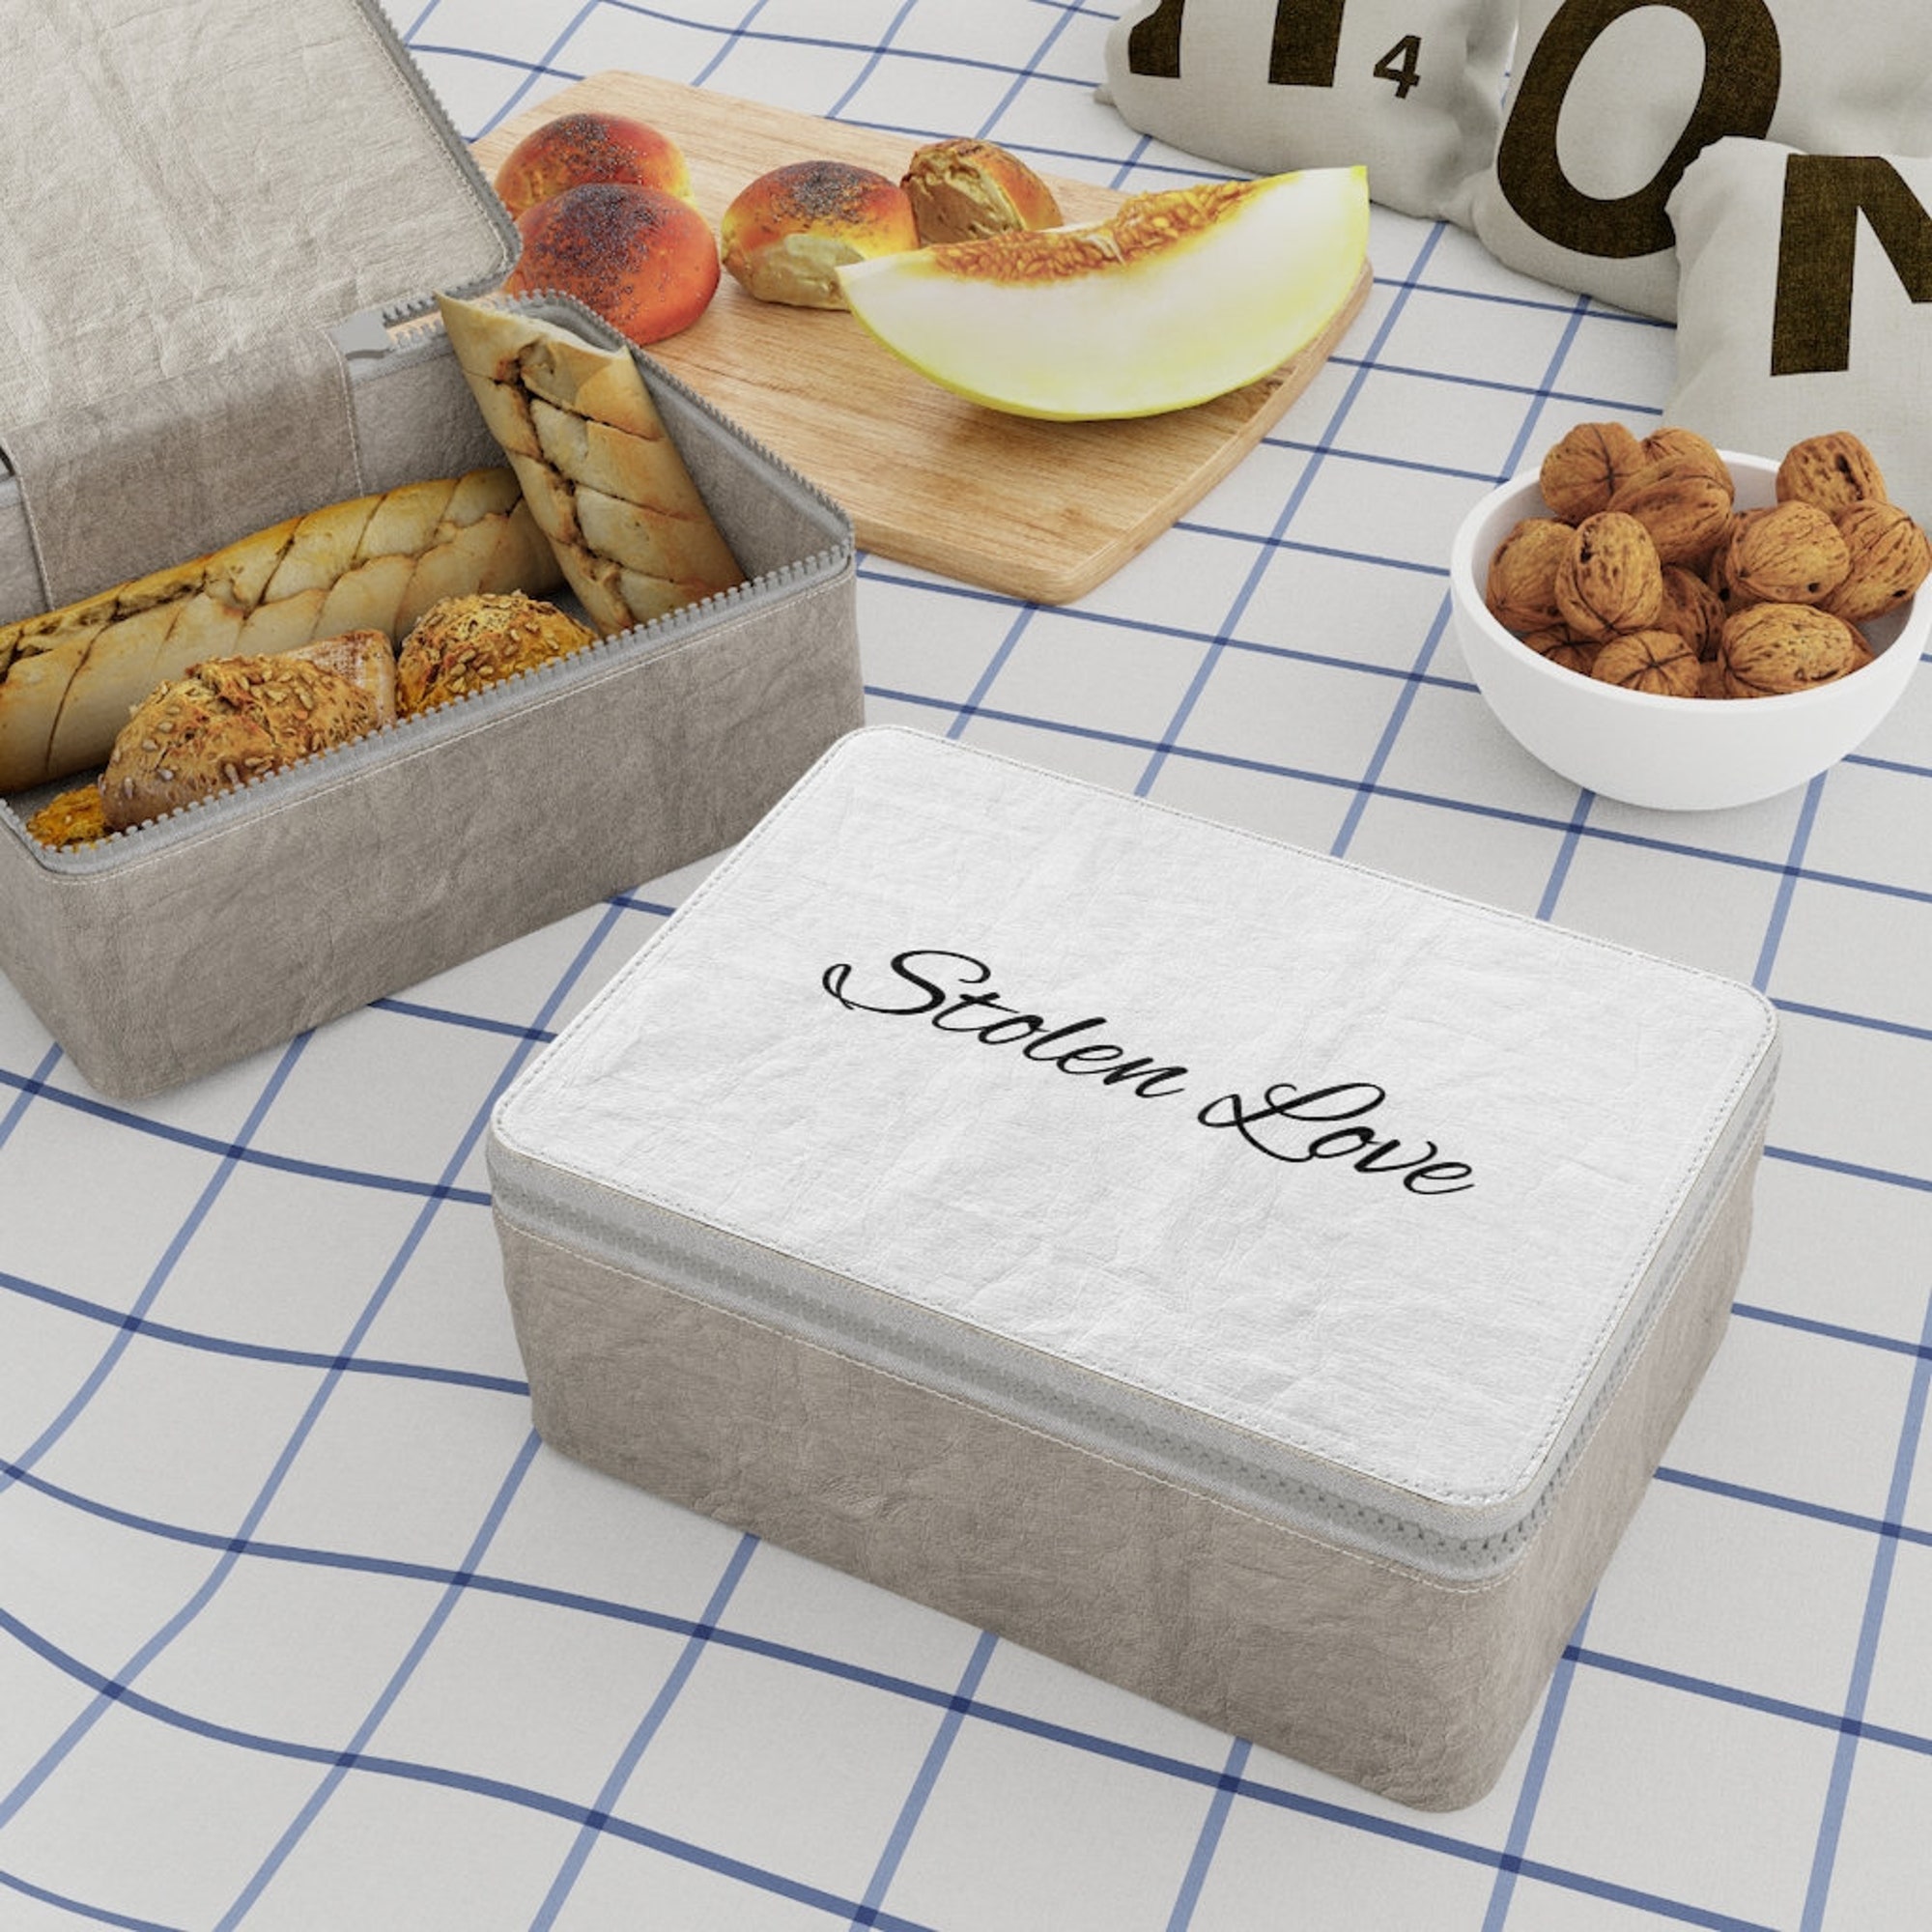 Paper Lunch Bag